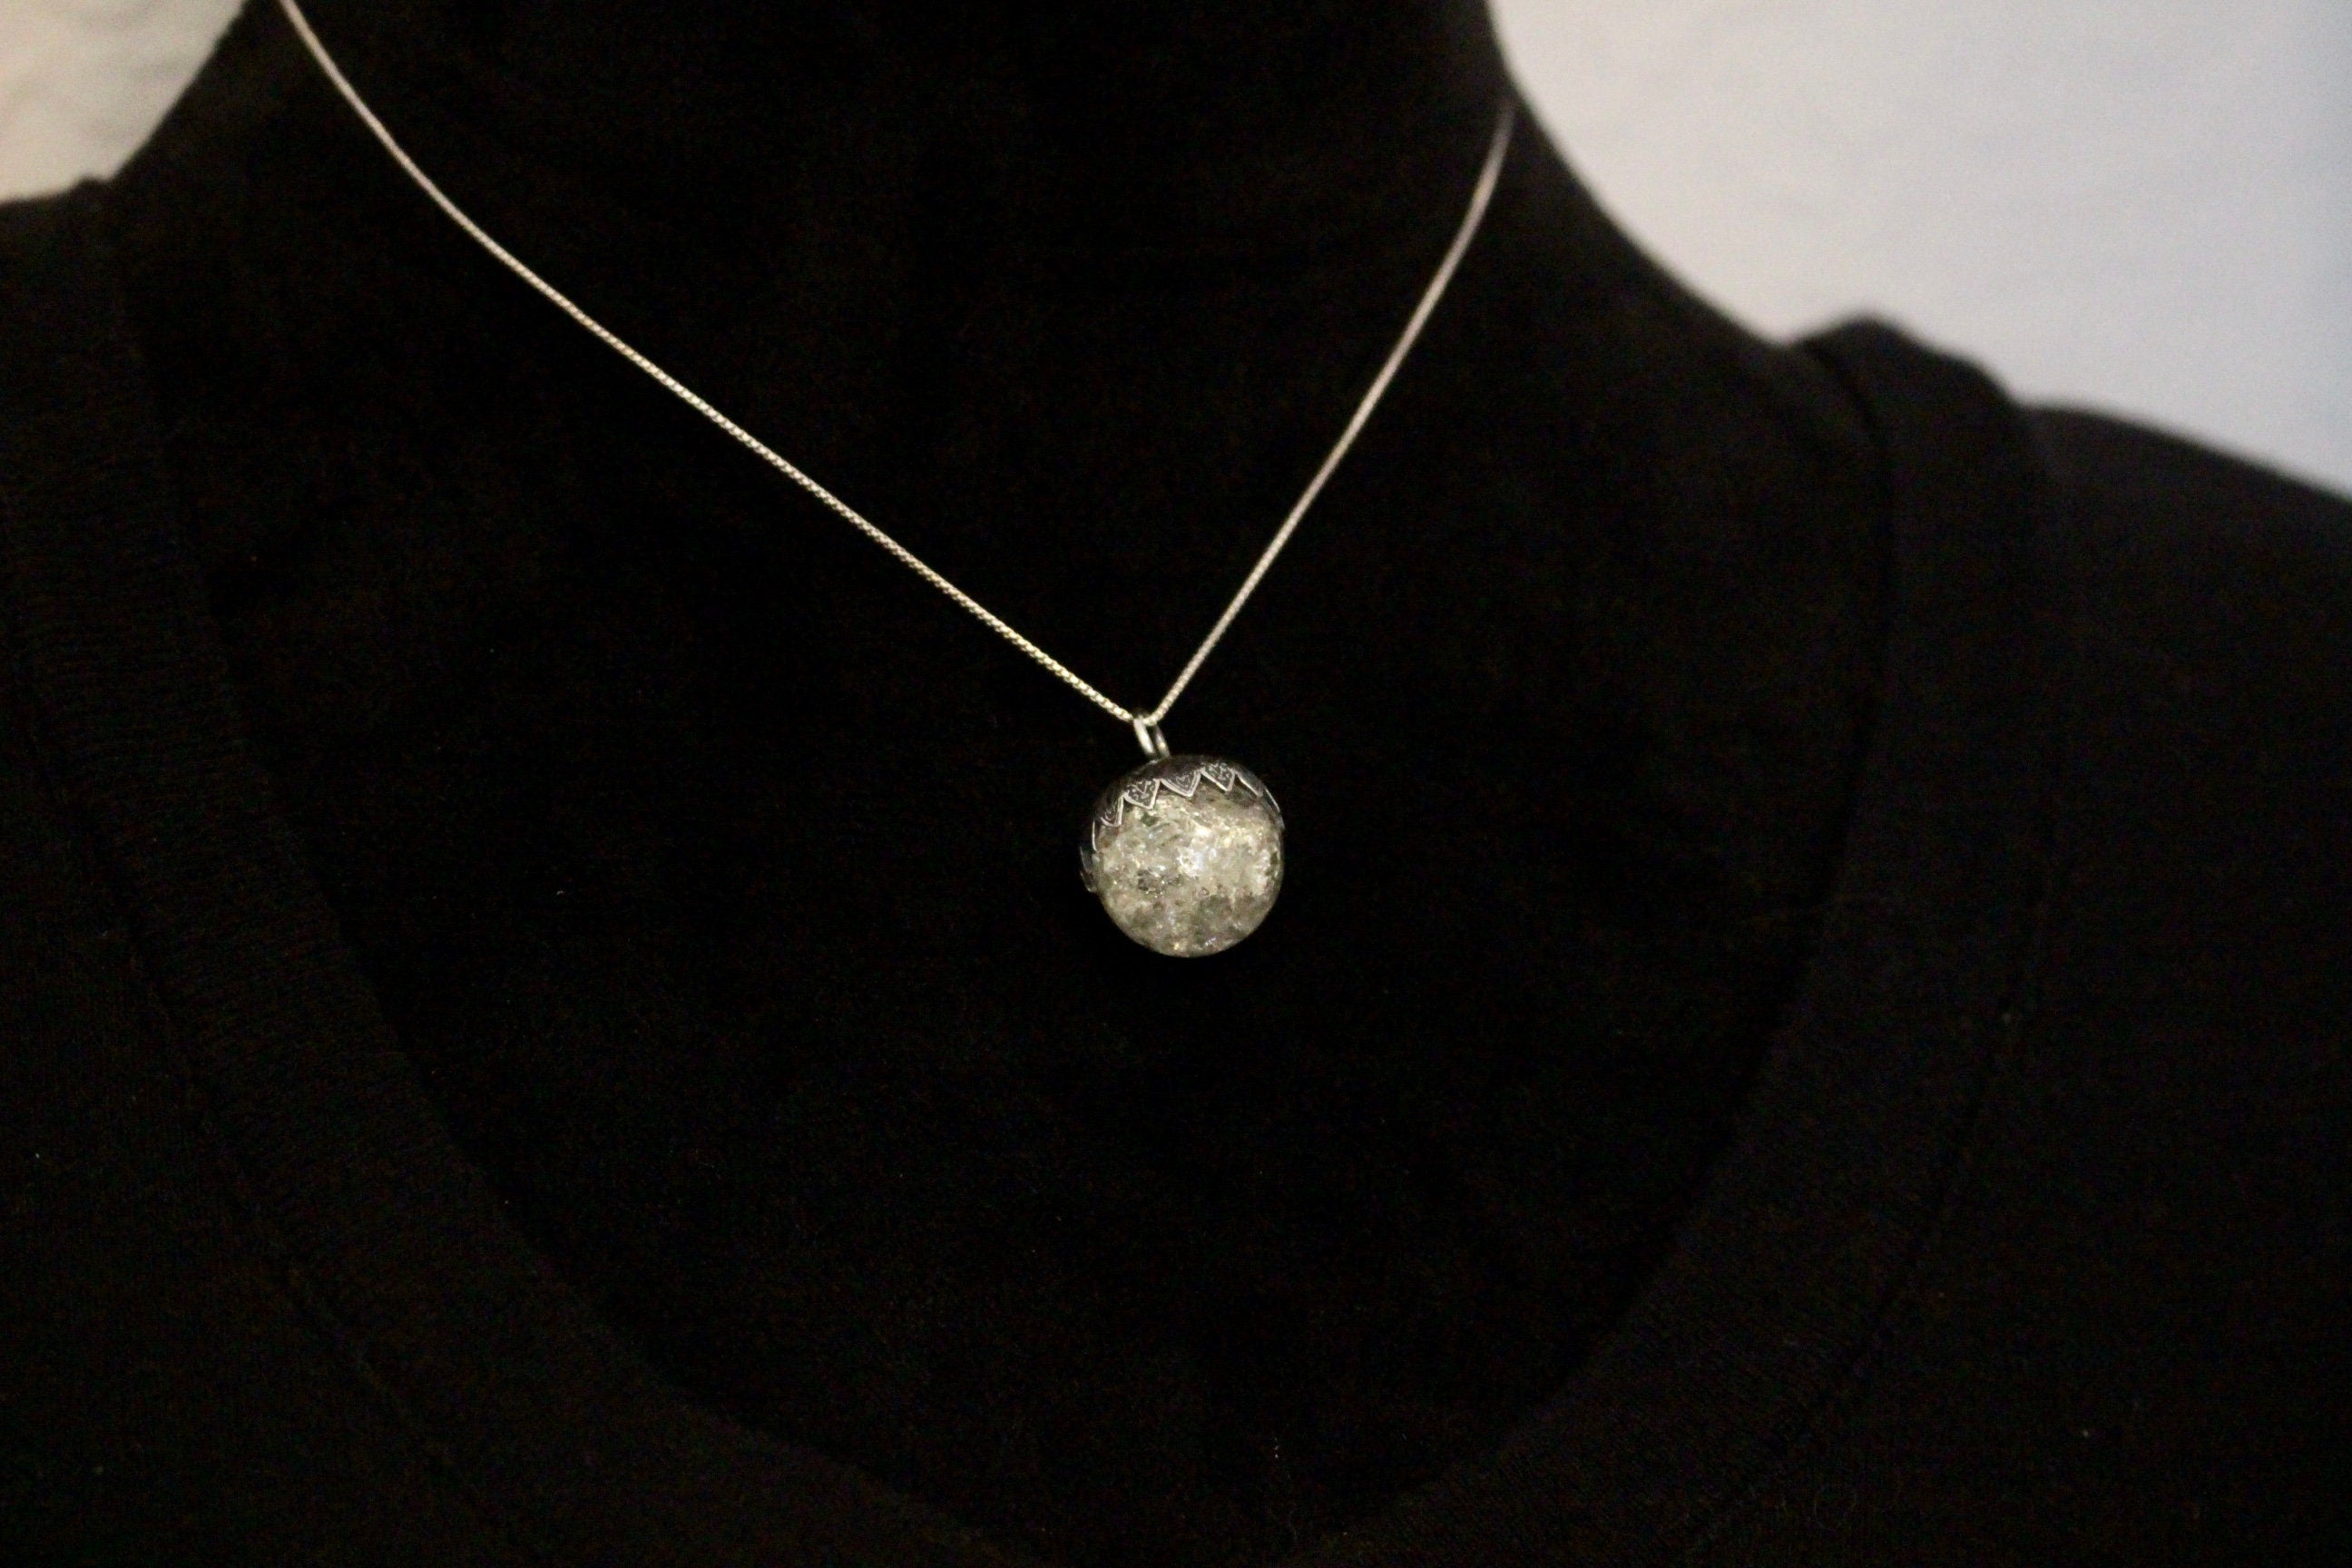 Sterling silver shattered marble necklace - mandala necklace - charm necklace - gift for her - jewelry - baked marble